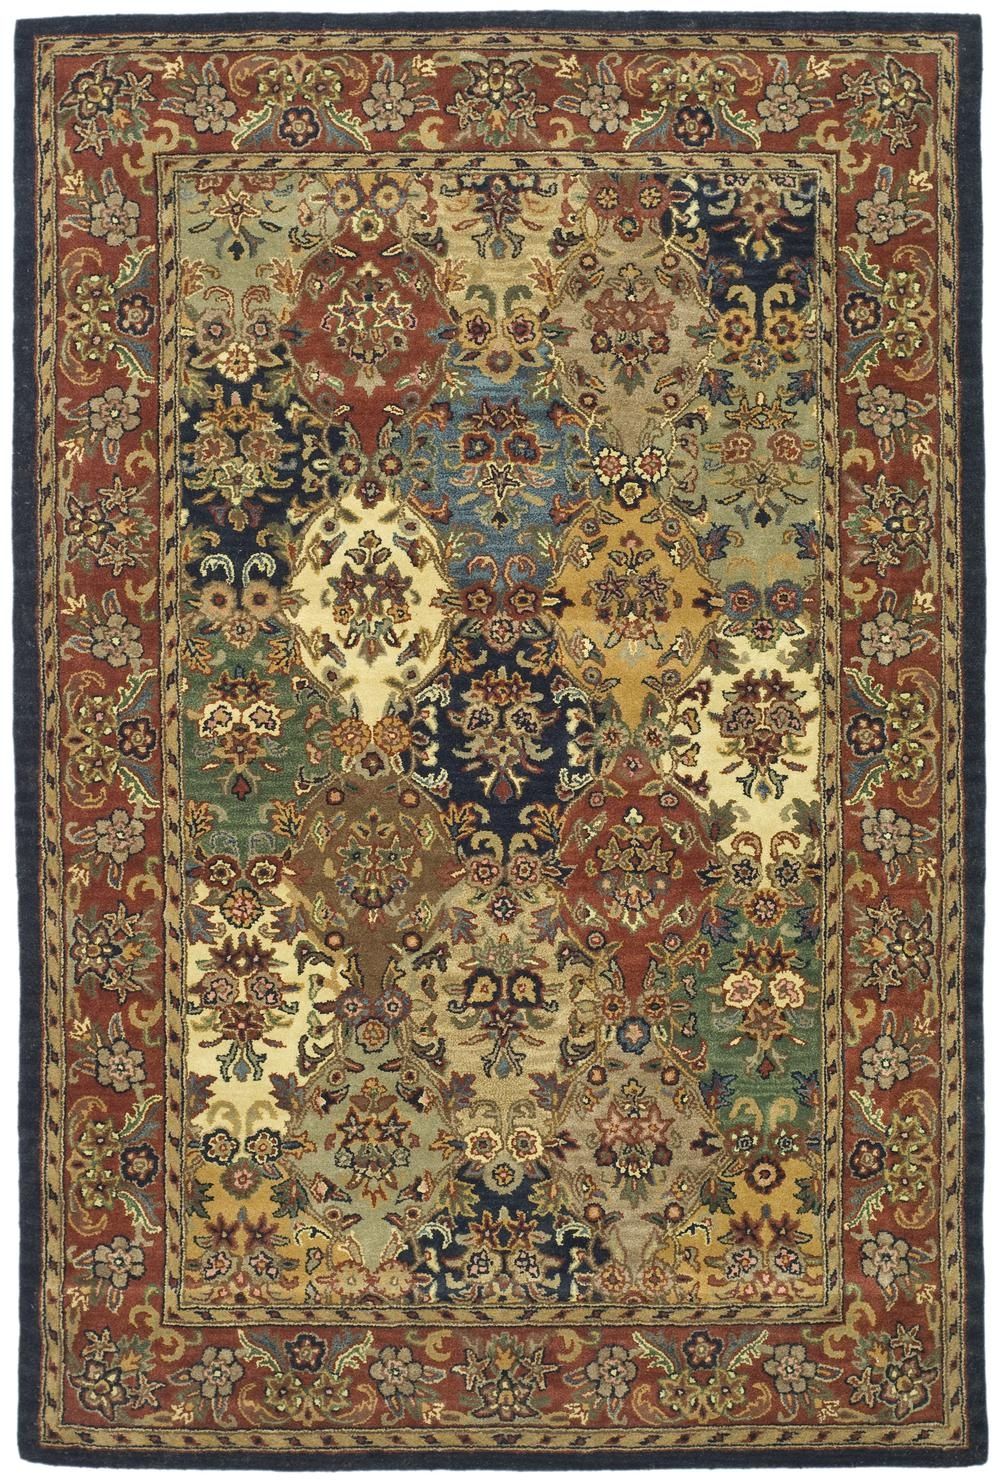 Discount Wool Area Rugs Starting At 13 Free Shipping Bold Rugs Throughout Discount Wool Area Rugs (View 4 of 15)